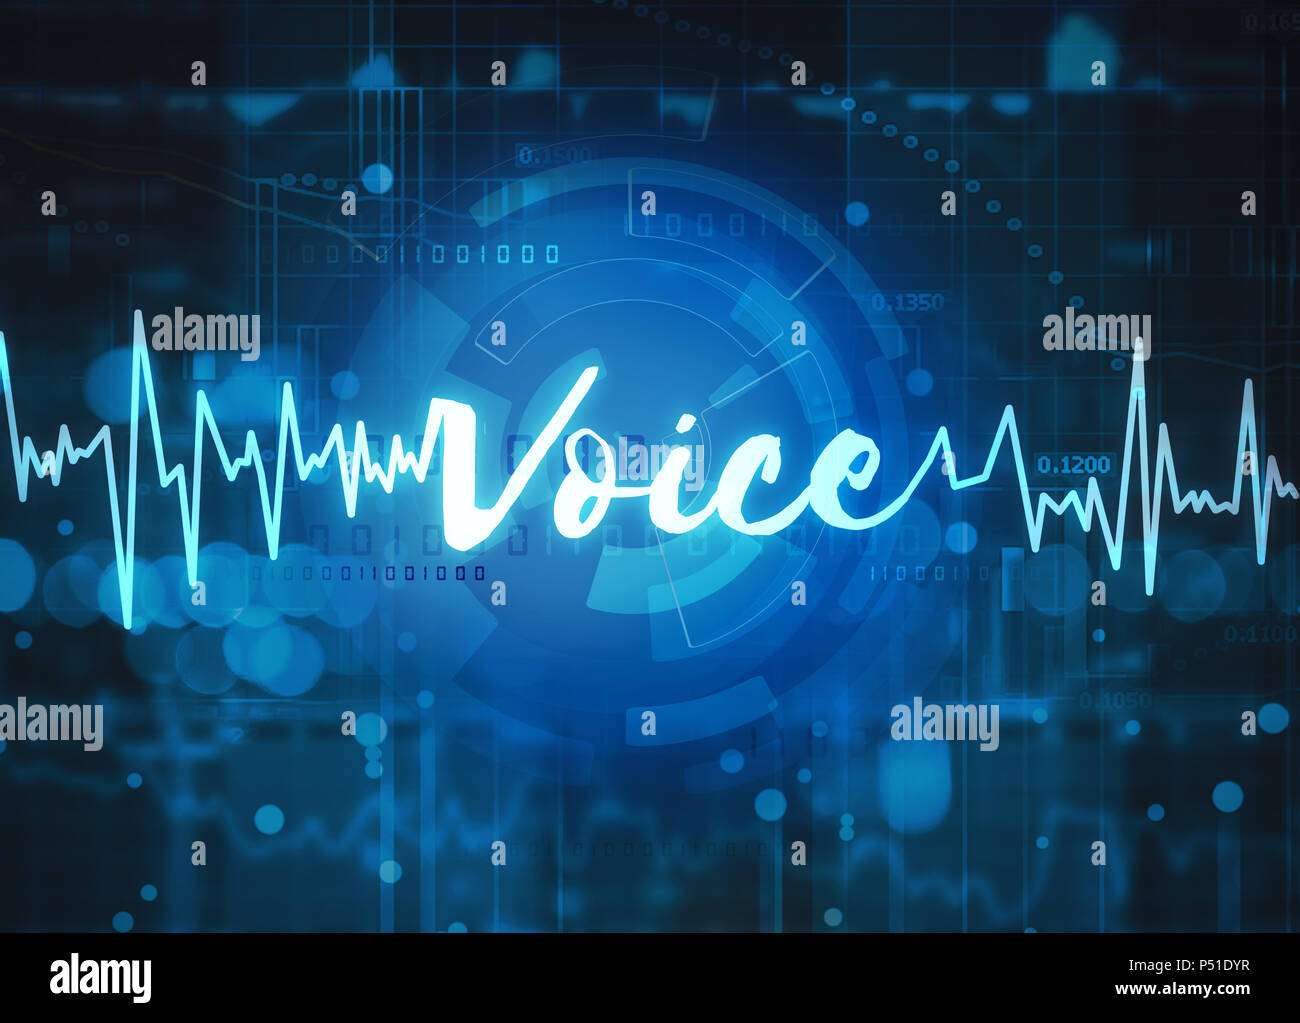 voice recognition and verification technology Stock Photo